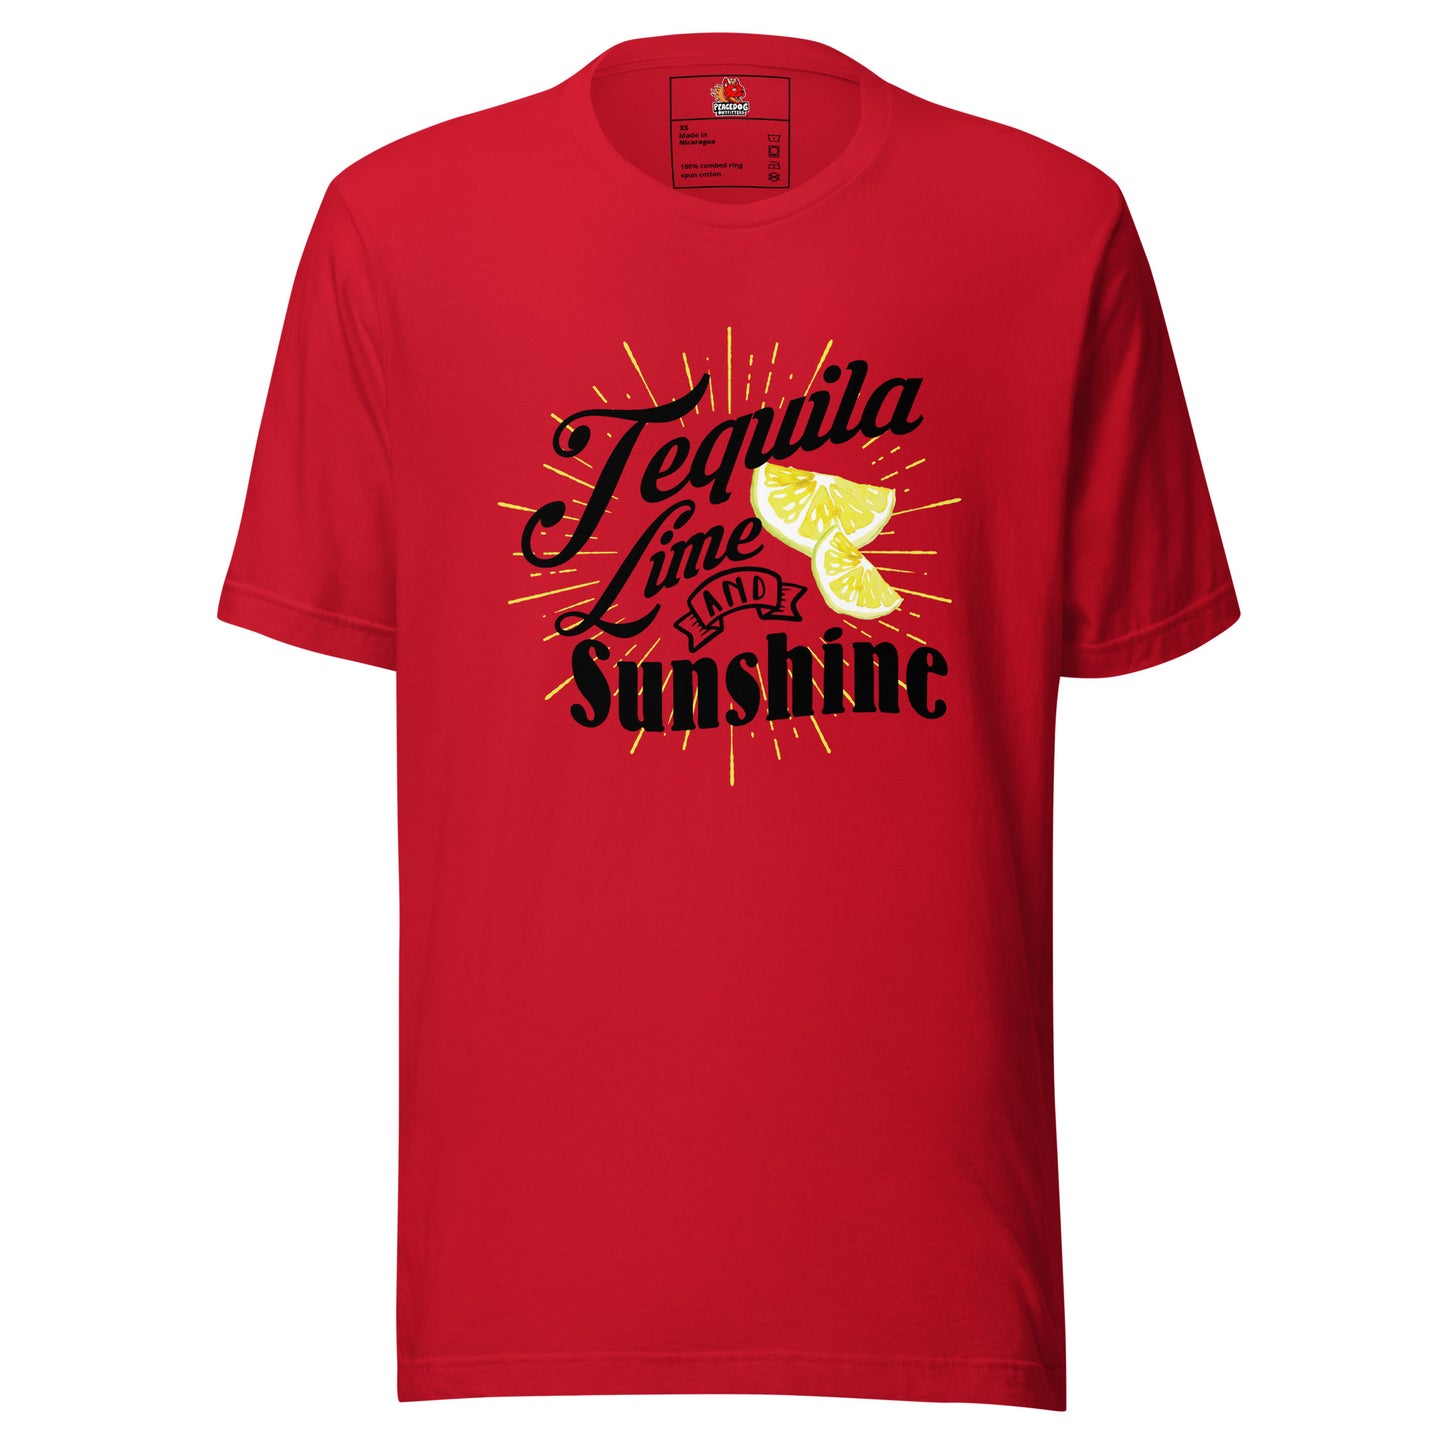 Tequila, Lime, and Sunshine T-shirt